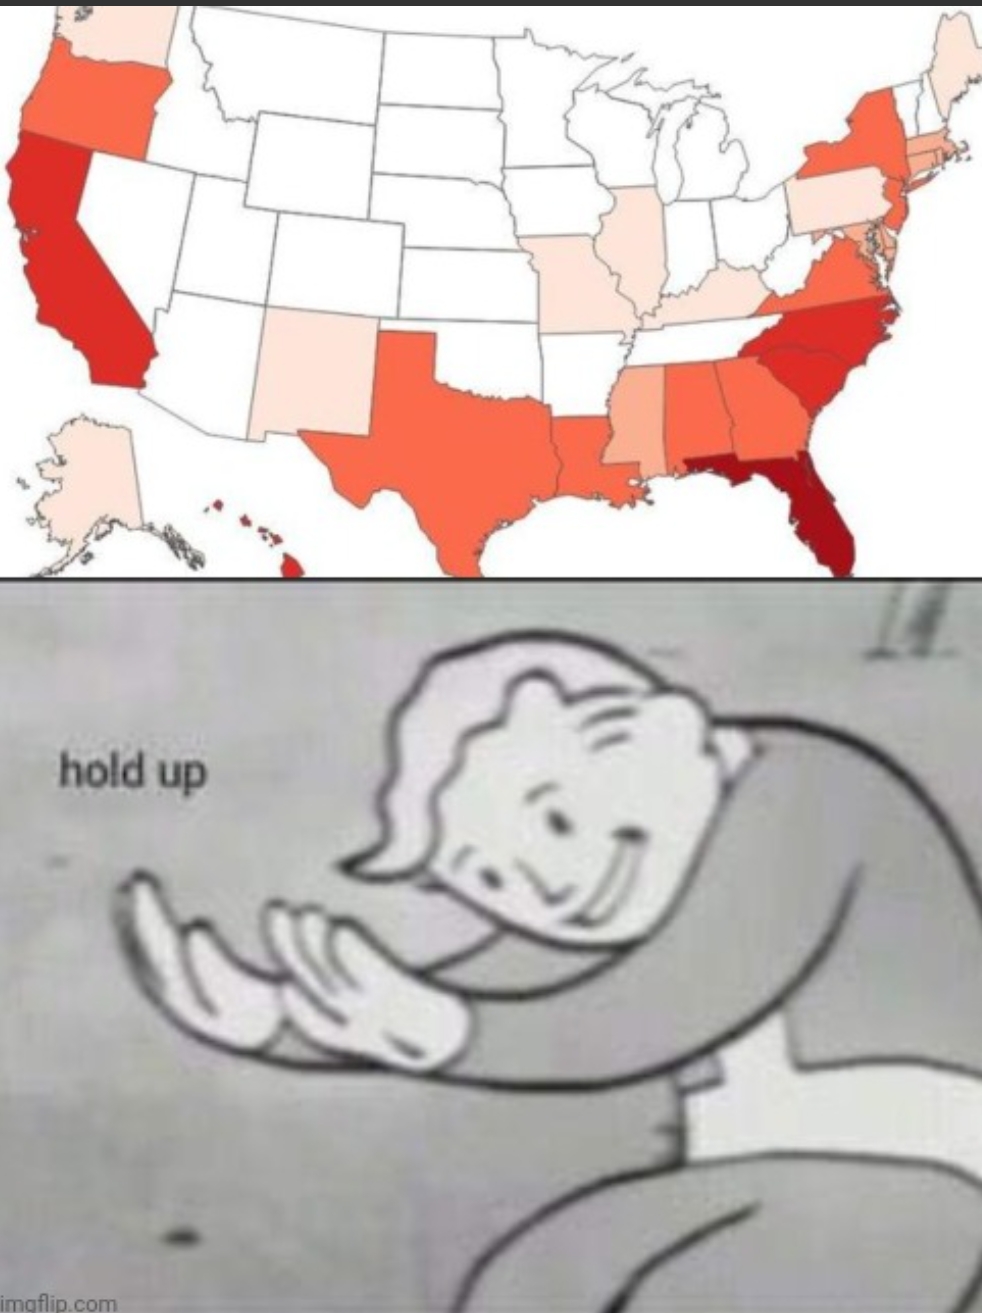 USA hold up Blank Meme Template